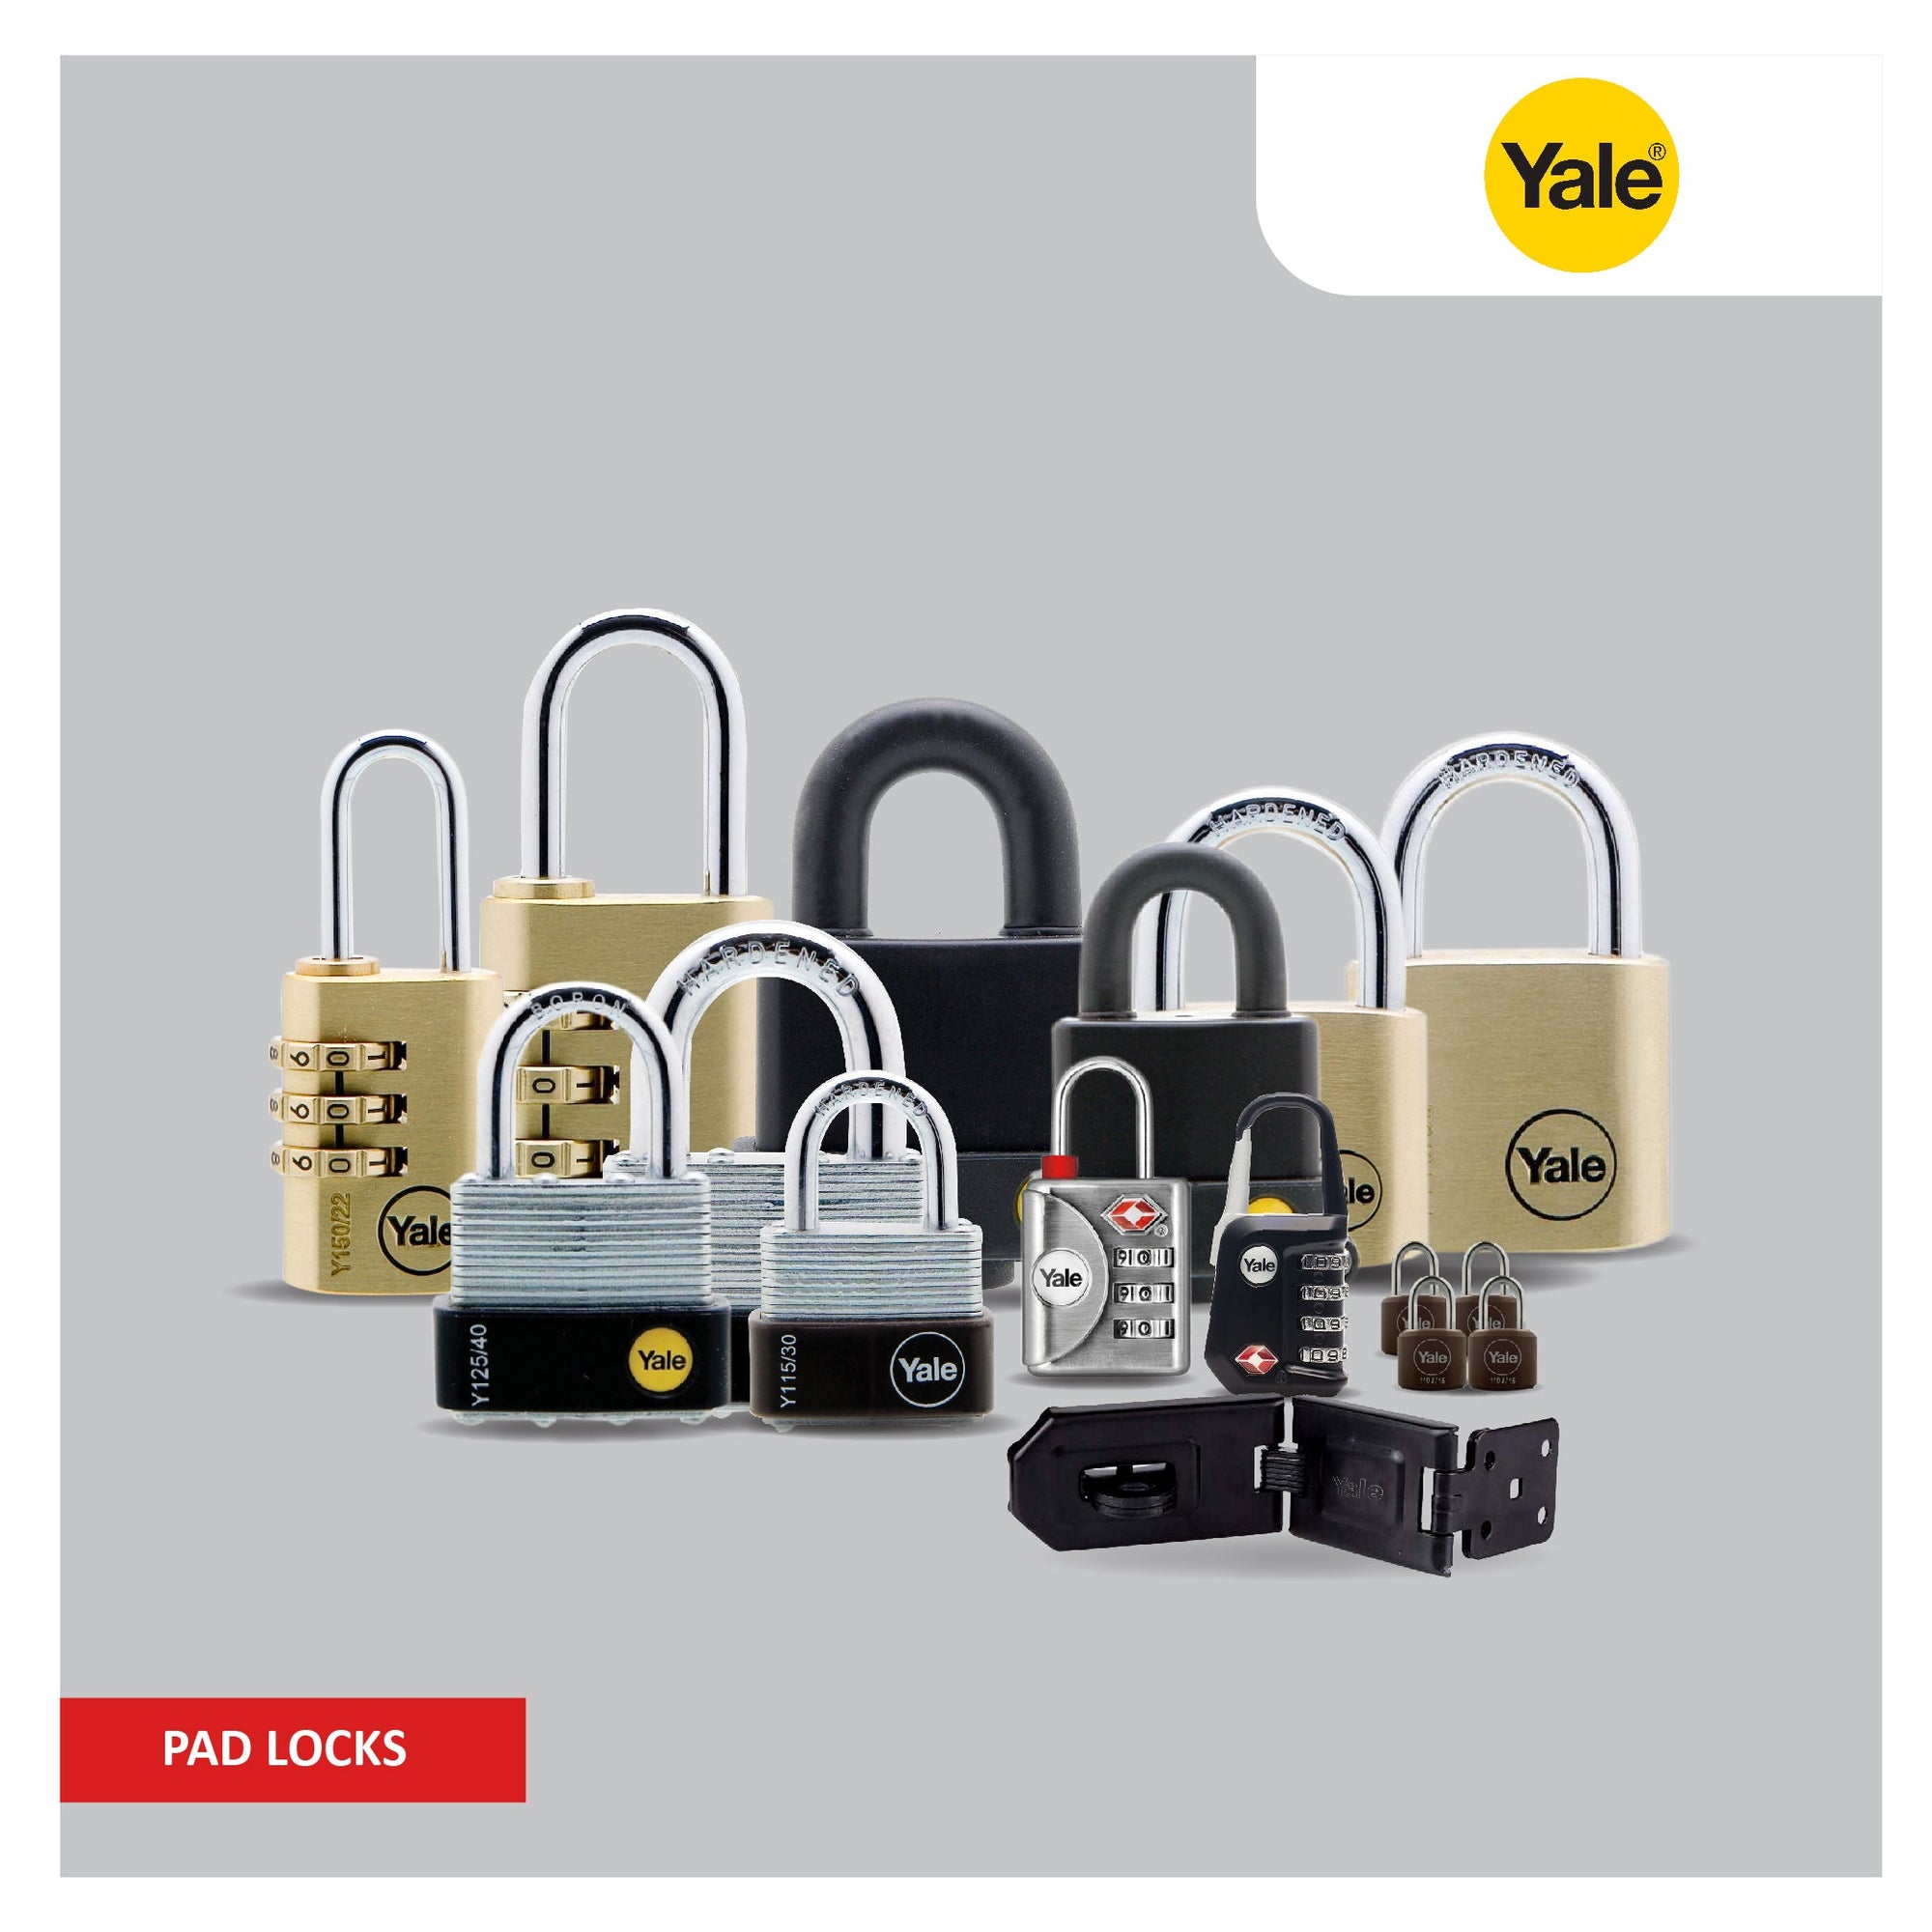 Reliable Yale padlocks and hasps accessories by M. M. Noorbhoy & Co - High-quality security solutions for peace of mind.